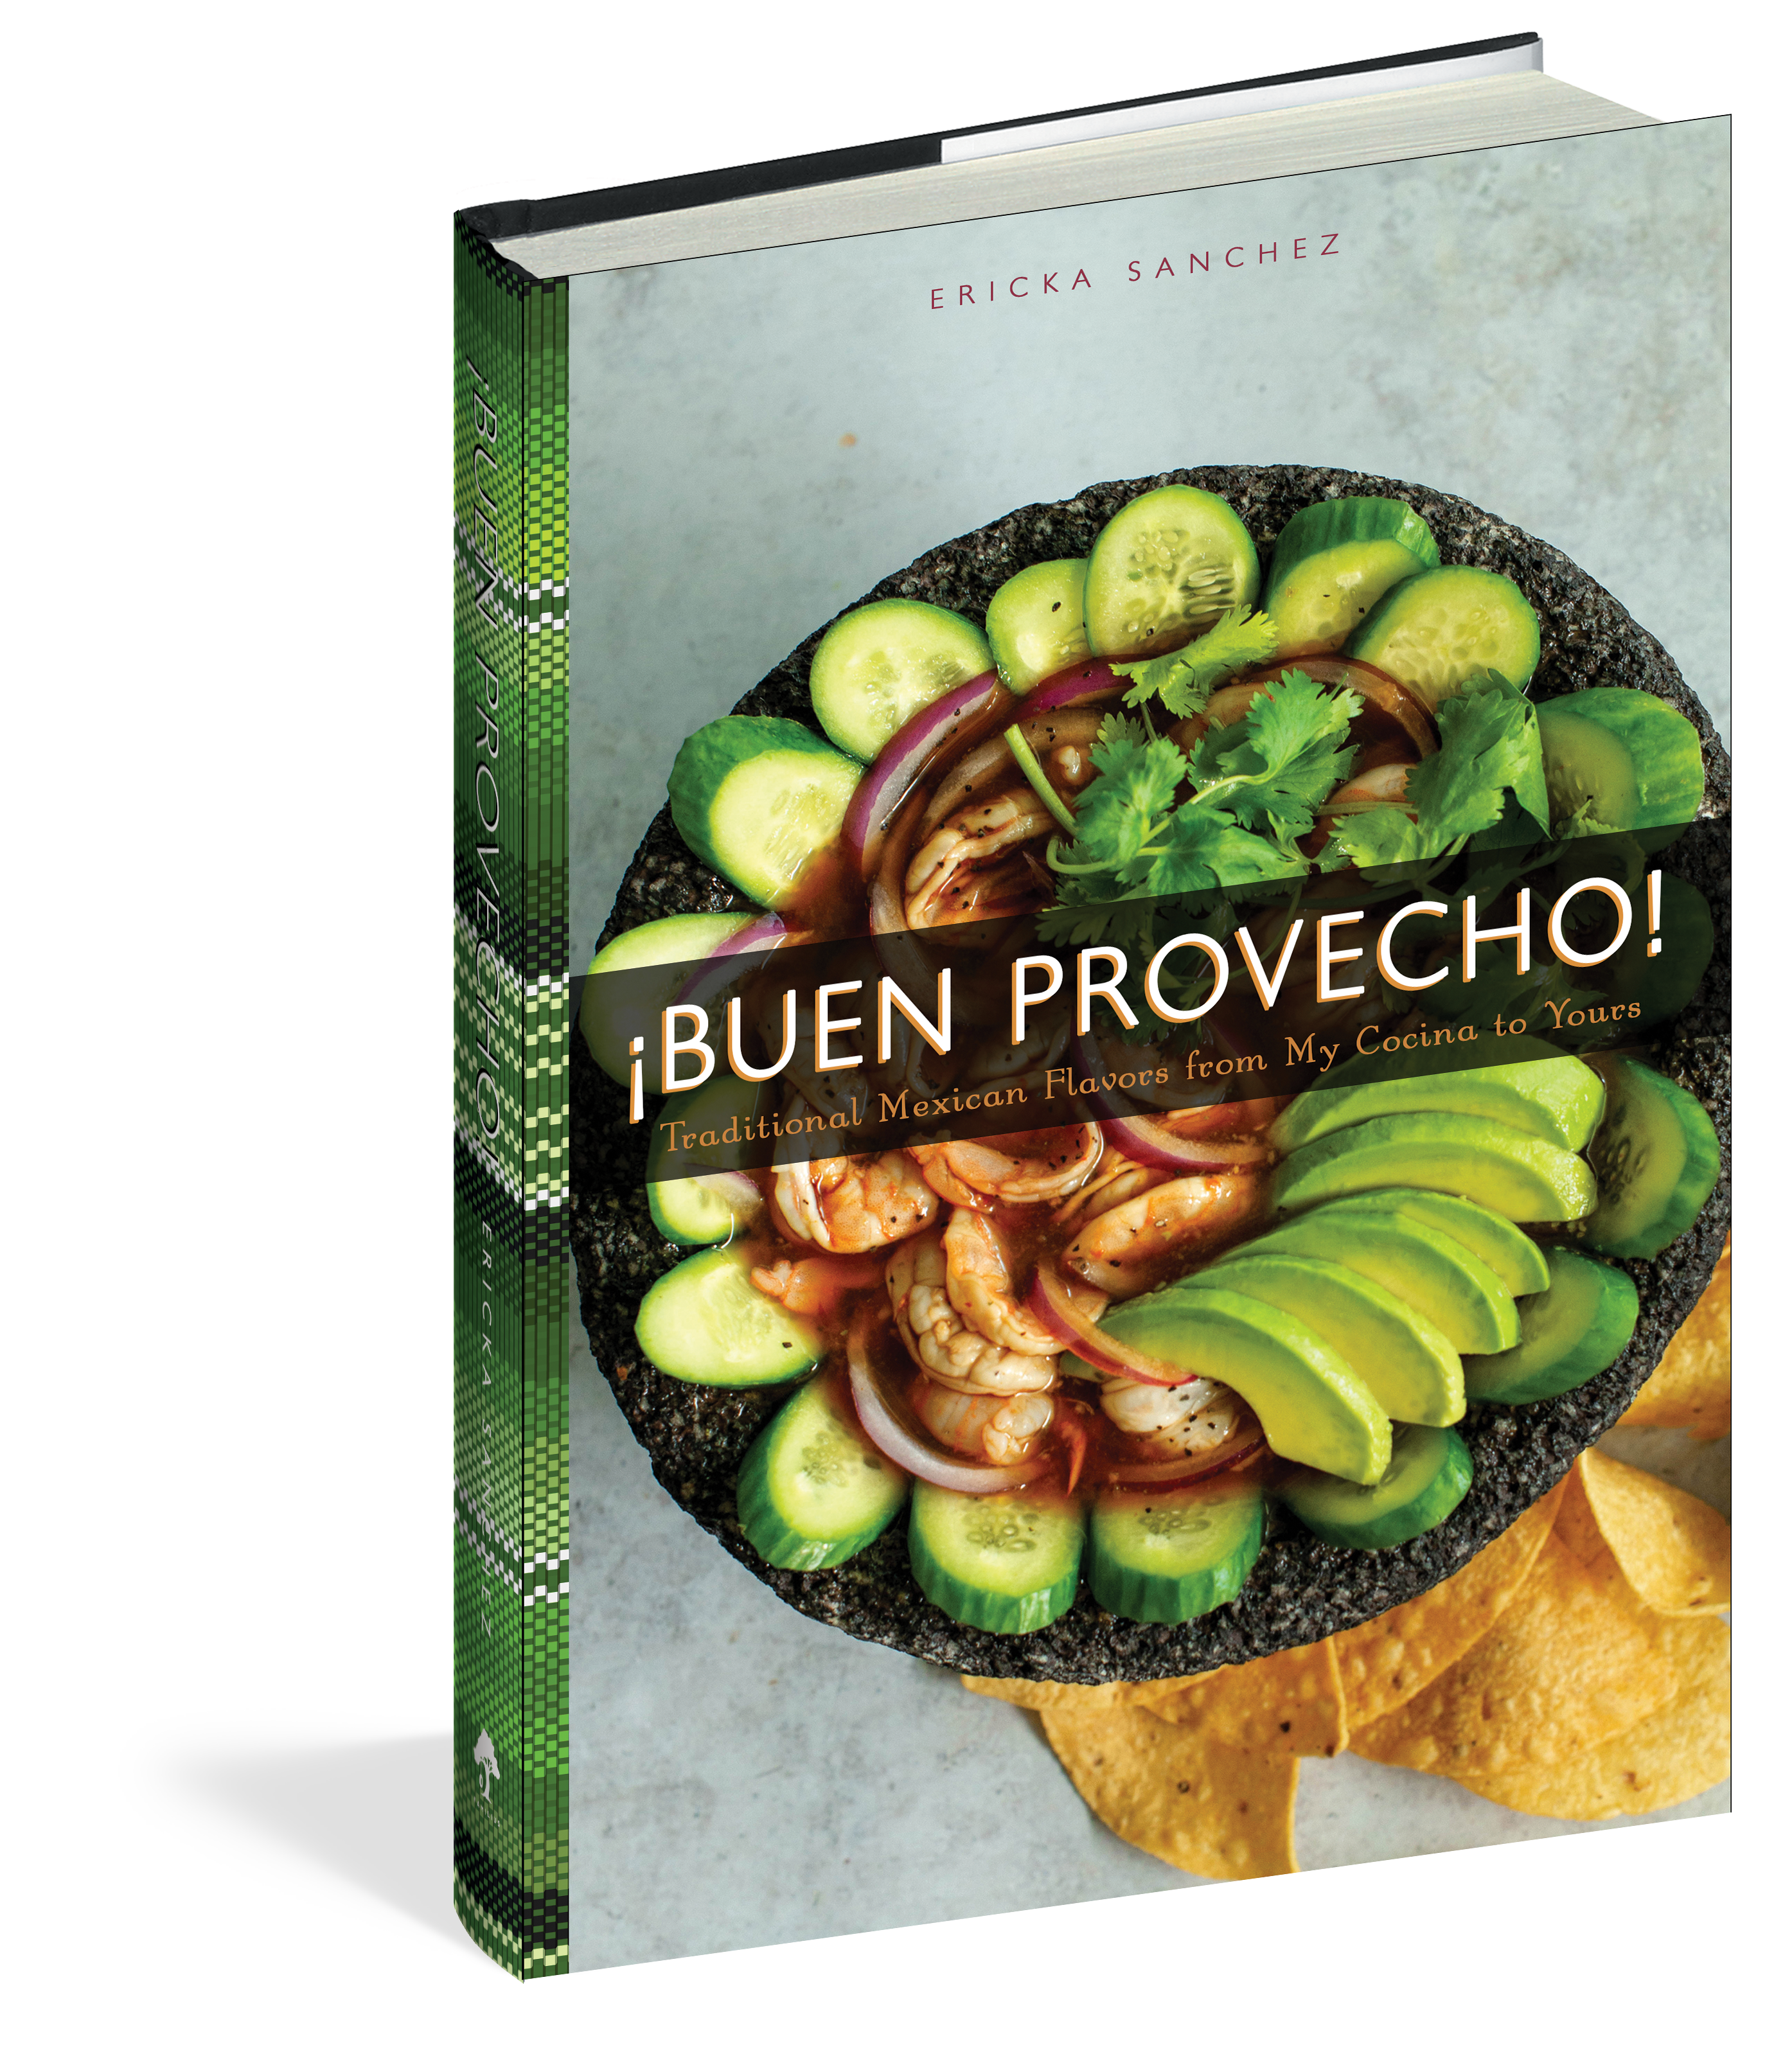 ¡Buen Provecho! - Traditional Mexican Flavors From My Cocina to Yours    